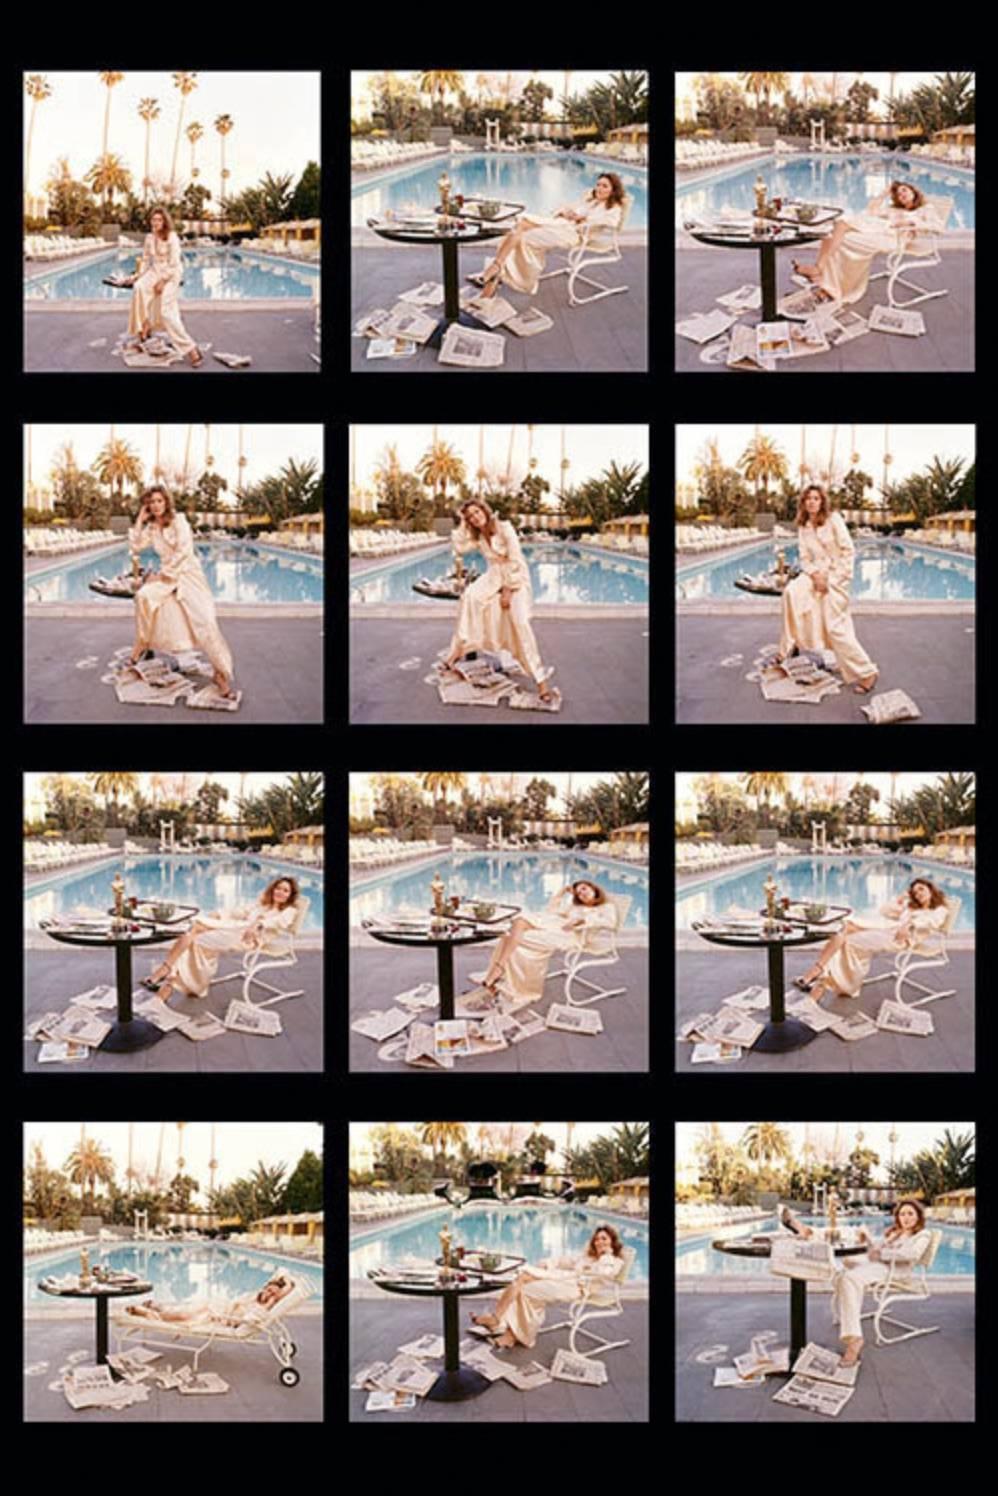 Terry O'Neill Color Photograph - Faye Dunaway, Beverly Hills Hotel 1977